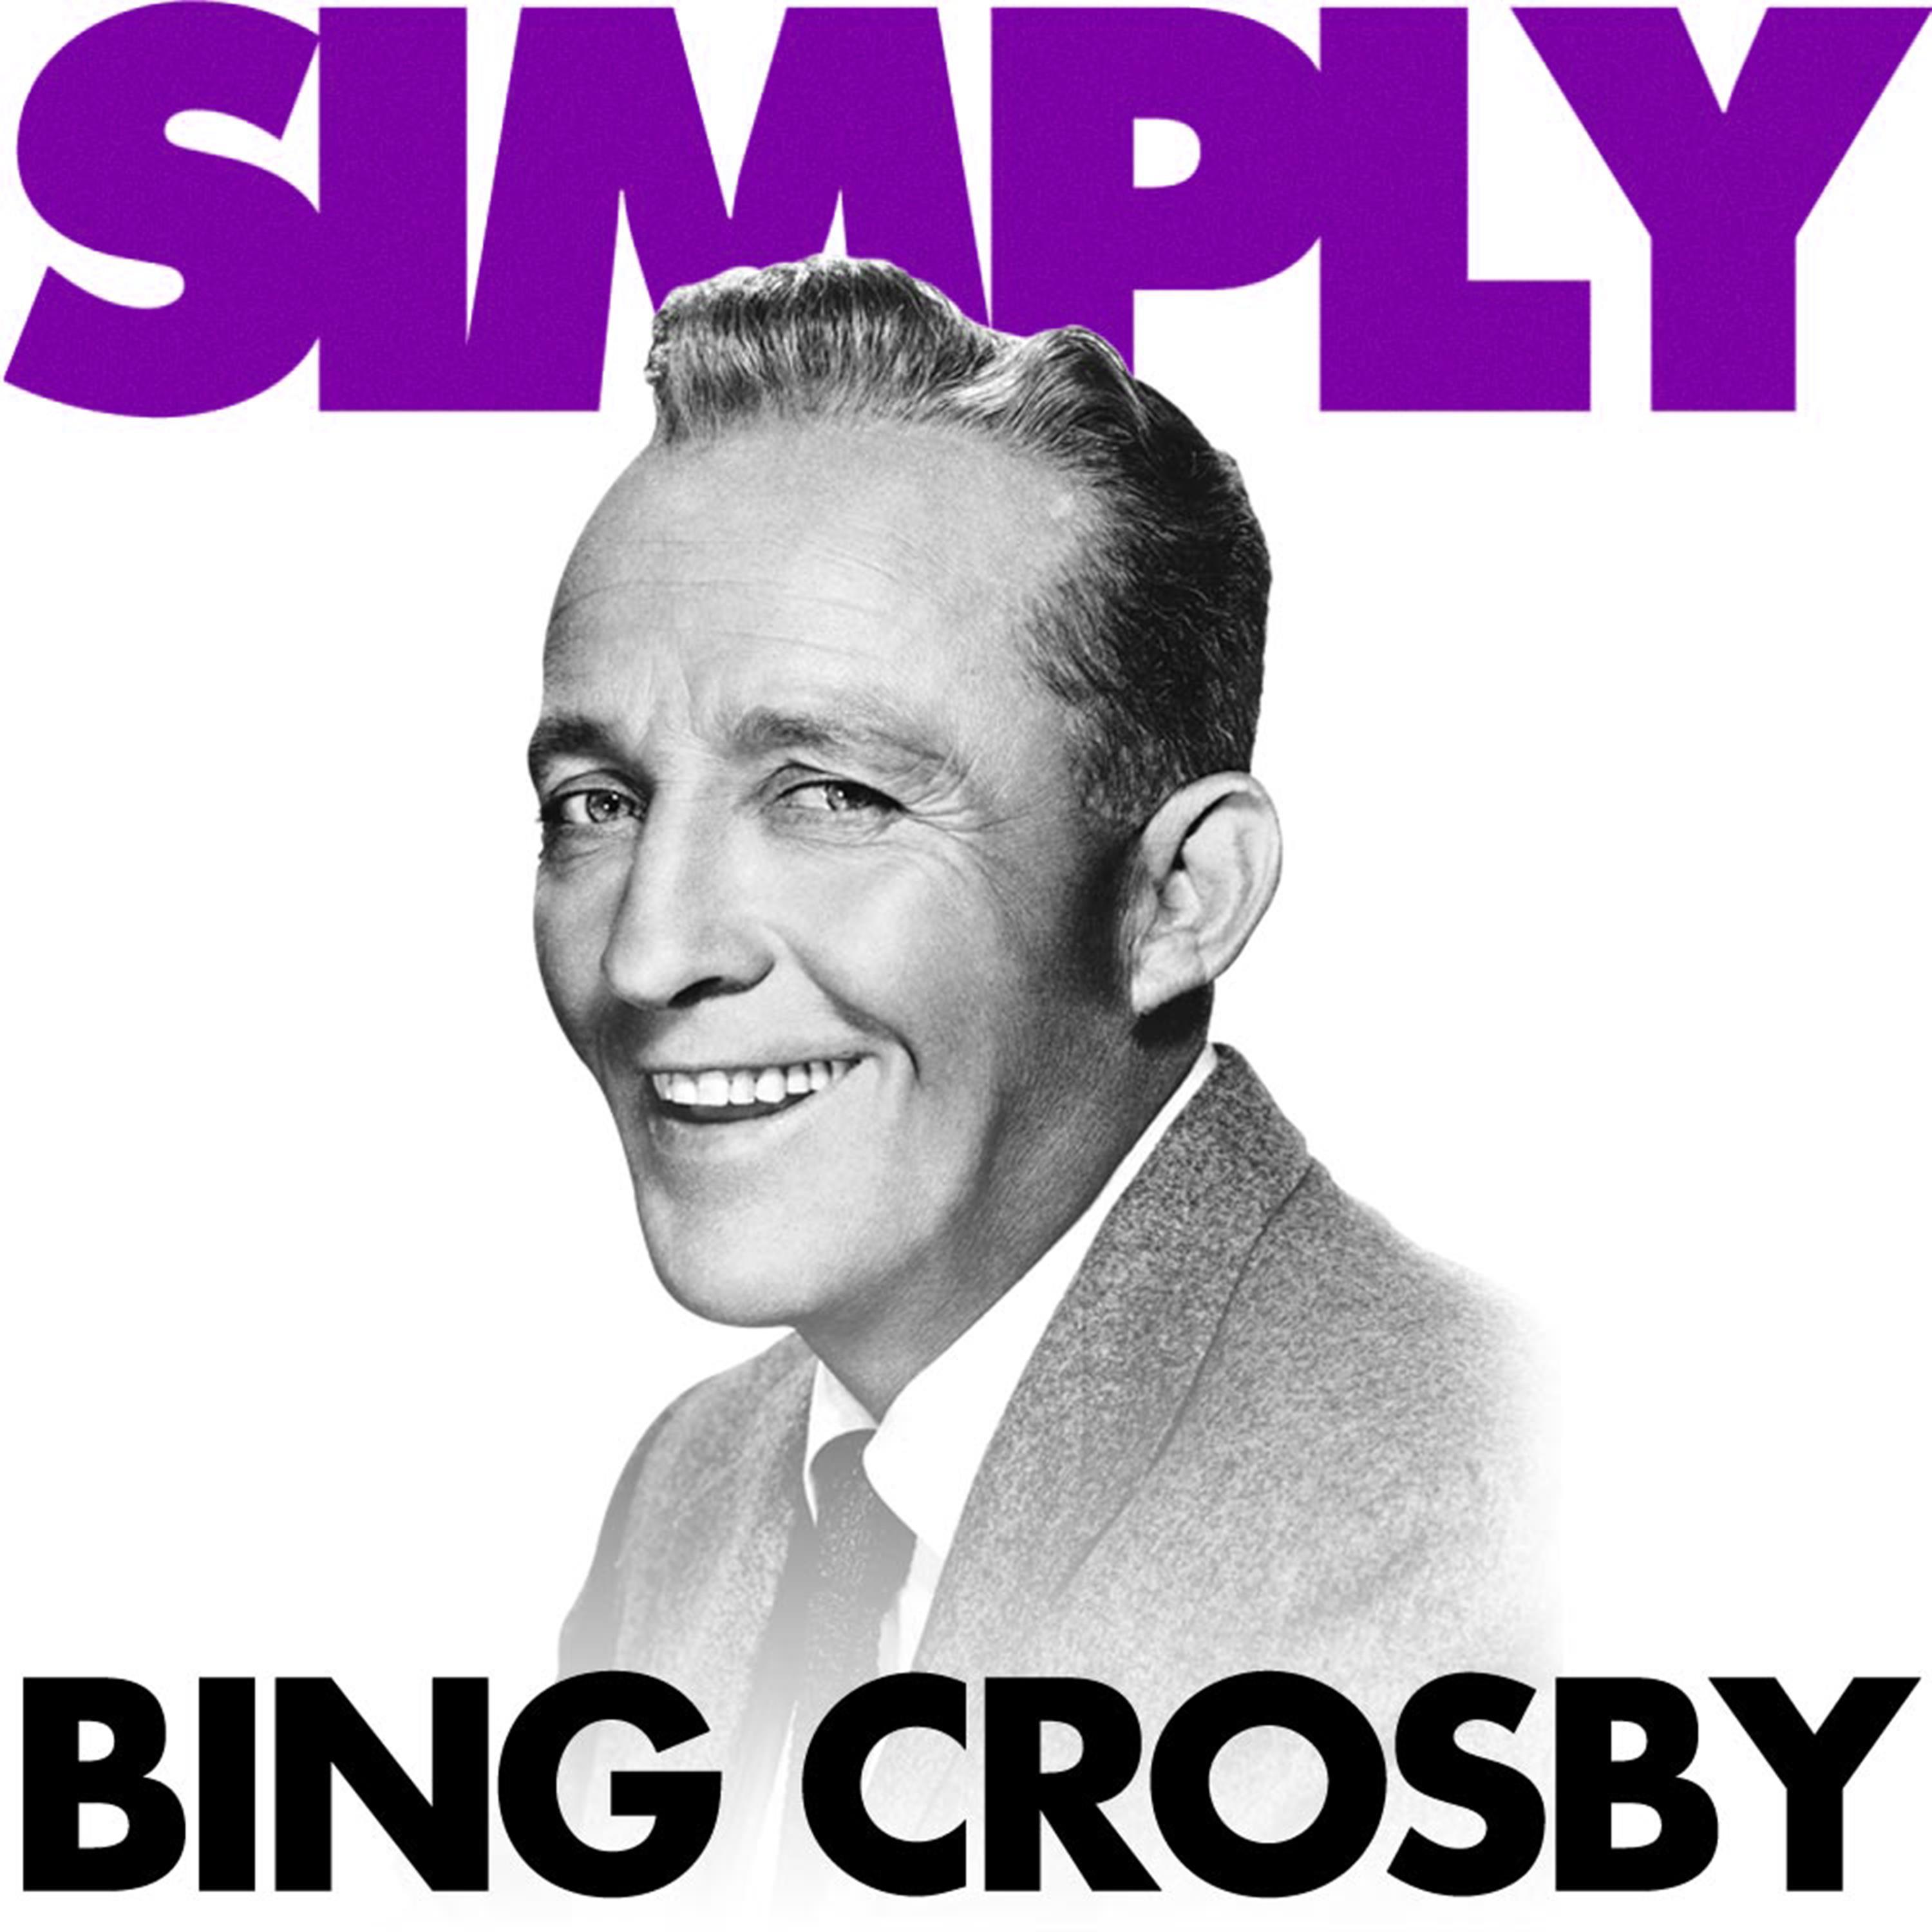 Bing Crosby - I'm Gonna Sit Right Down and Write Myself a Letter